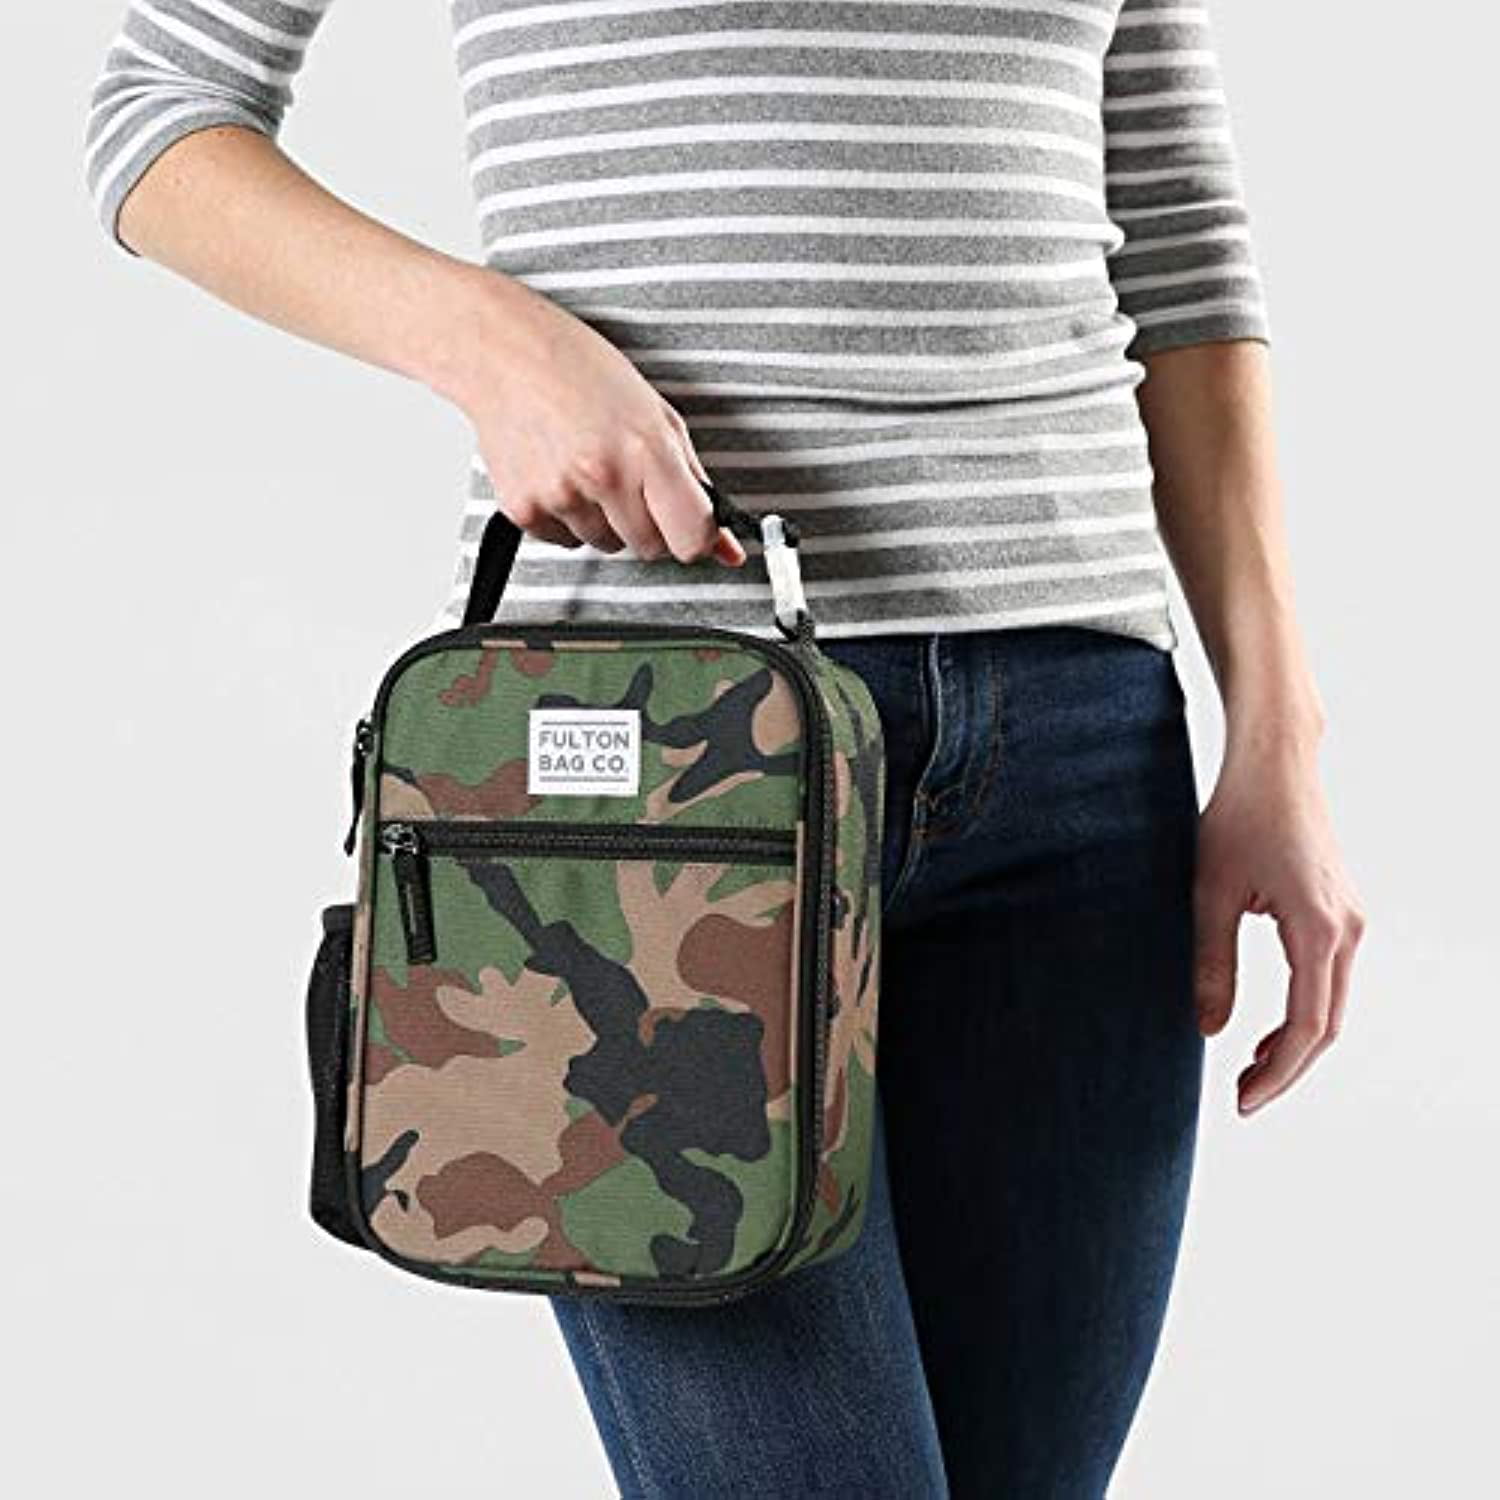 Fulton Bag Co. Lunch Tote - Upright Insulated Zippered - Camo